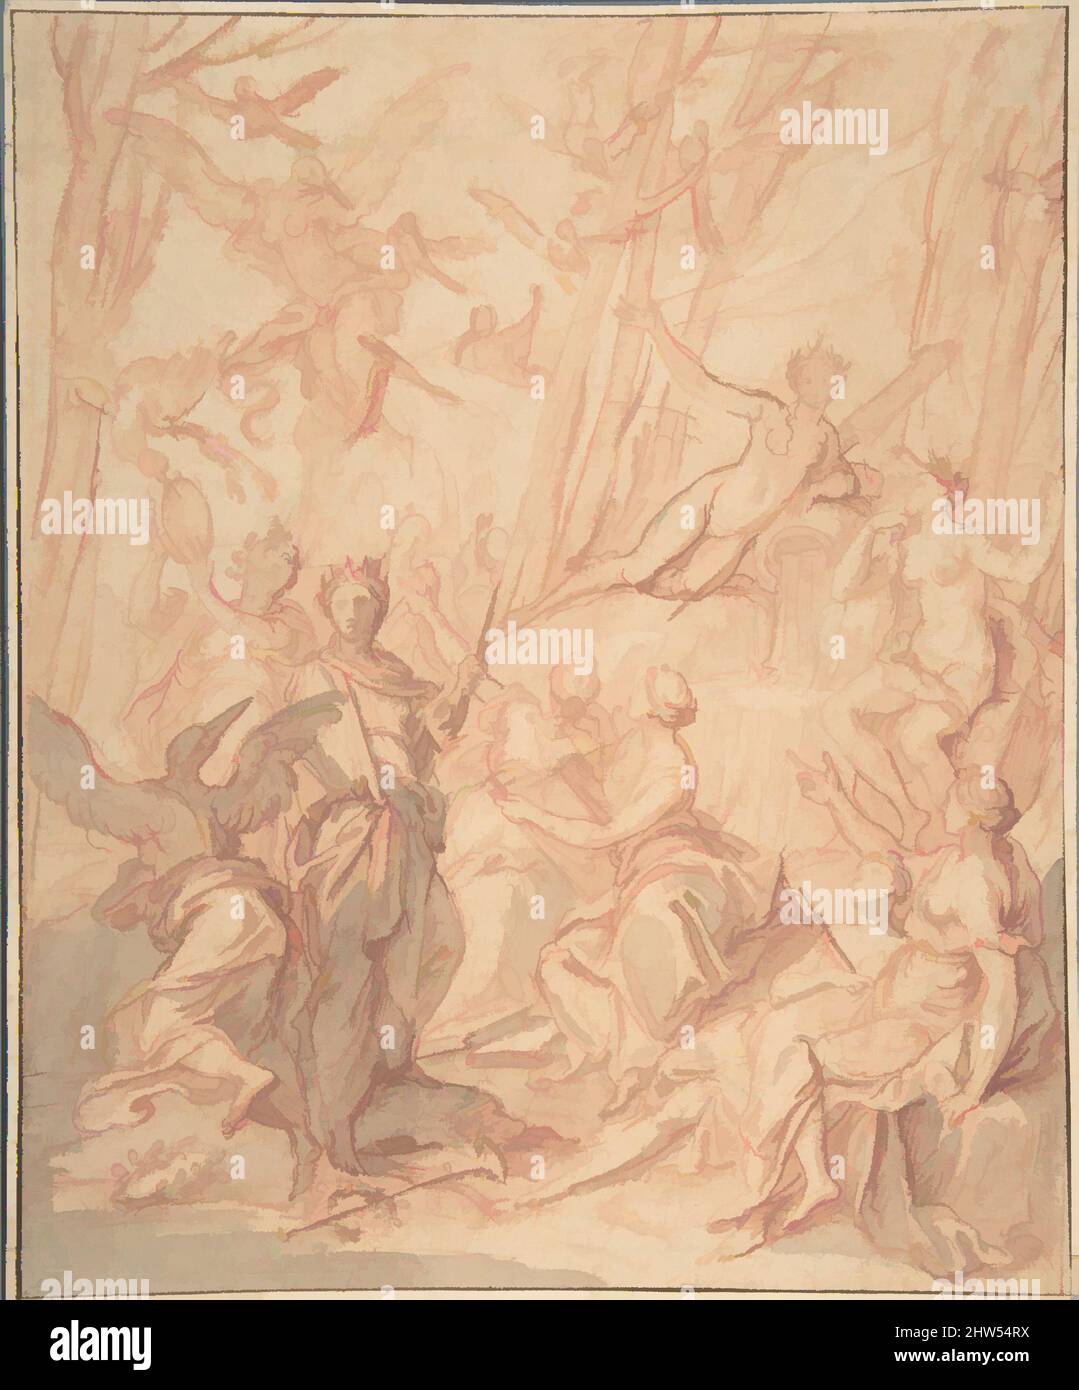 Art inspired by The Nine Pierides Transformed into Magpies after Their Unsuccessful Competition with the Muses (Ovid, Metamorphoses, V, 294 ff.), n.d., Red chalk, red and gray wash, framing lines in pen and brown ink., 10 11/16 x 8 3/4 in. (27.1 x 22.2 cm), Drawings, Antoine Dieu (, Classic works modernized by Artotop with a splash of modernity. Shapes, color and value, eye-catching visual impact on art. Emotions through freedom of artworks in a contemporary way. A timeless message pursuing a wildly creative new direction. Artists turning to the digital medium and creating the Artotop NFT Stock Photo